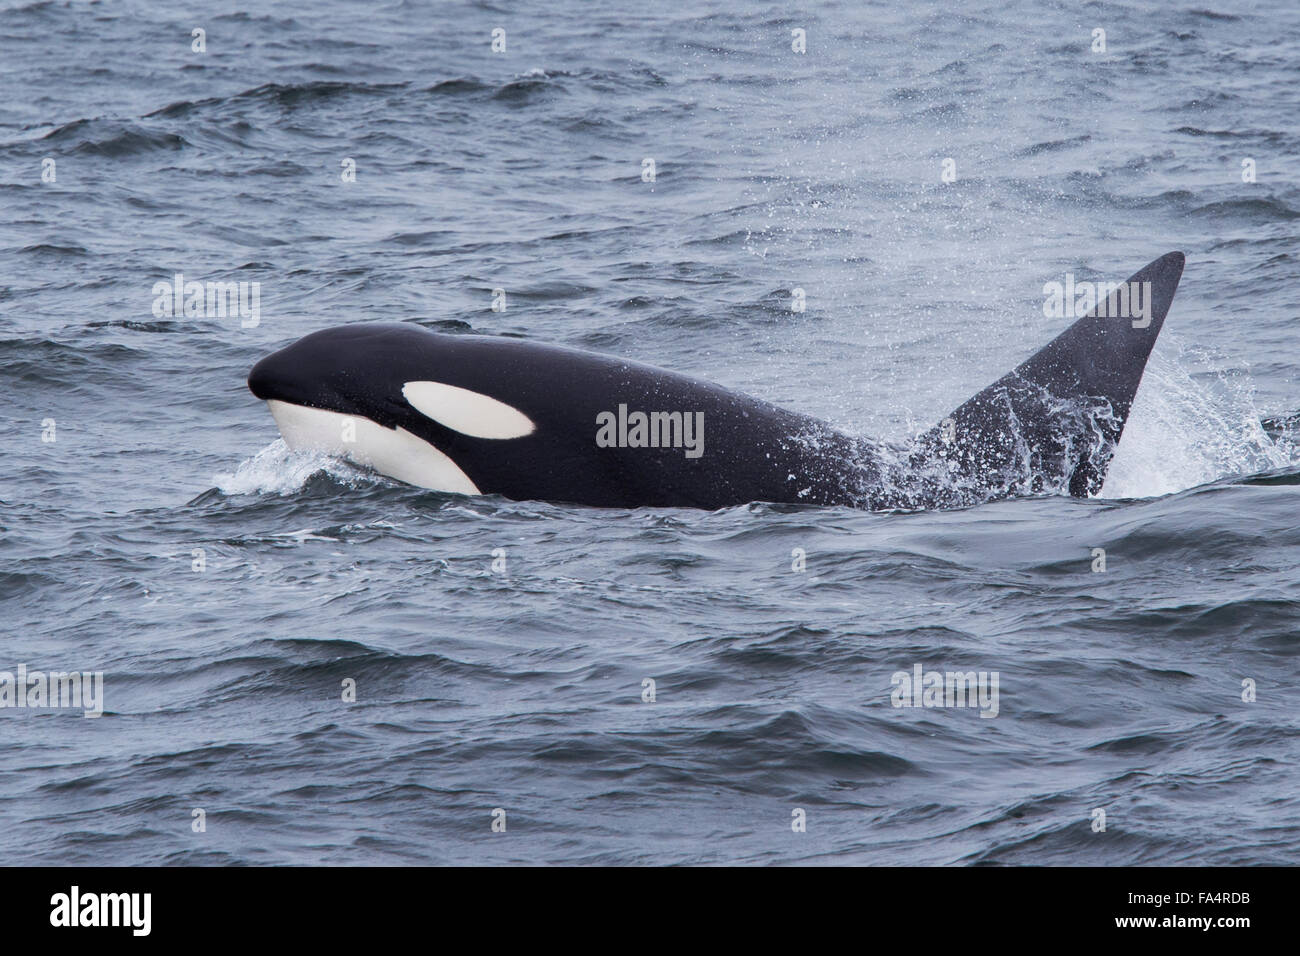 Large bull or male Orca or Killer Whale, surfacing with large, errect dorsal fin showing, Monterey, California, Pacific Ocean Stock Photo